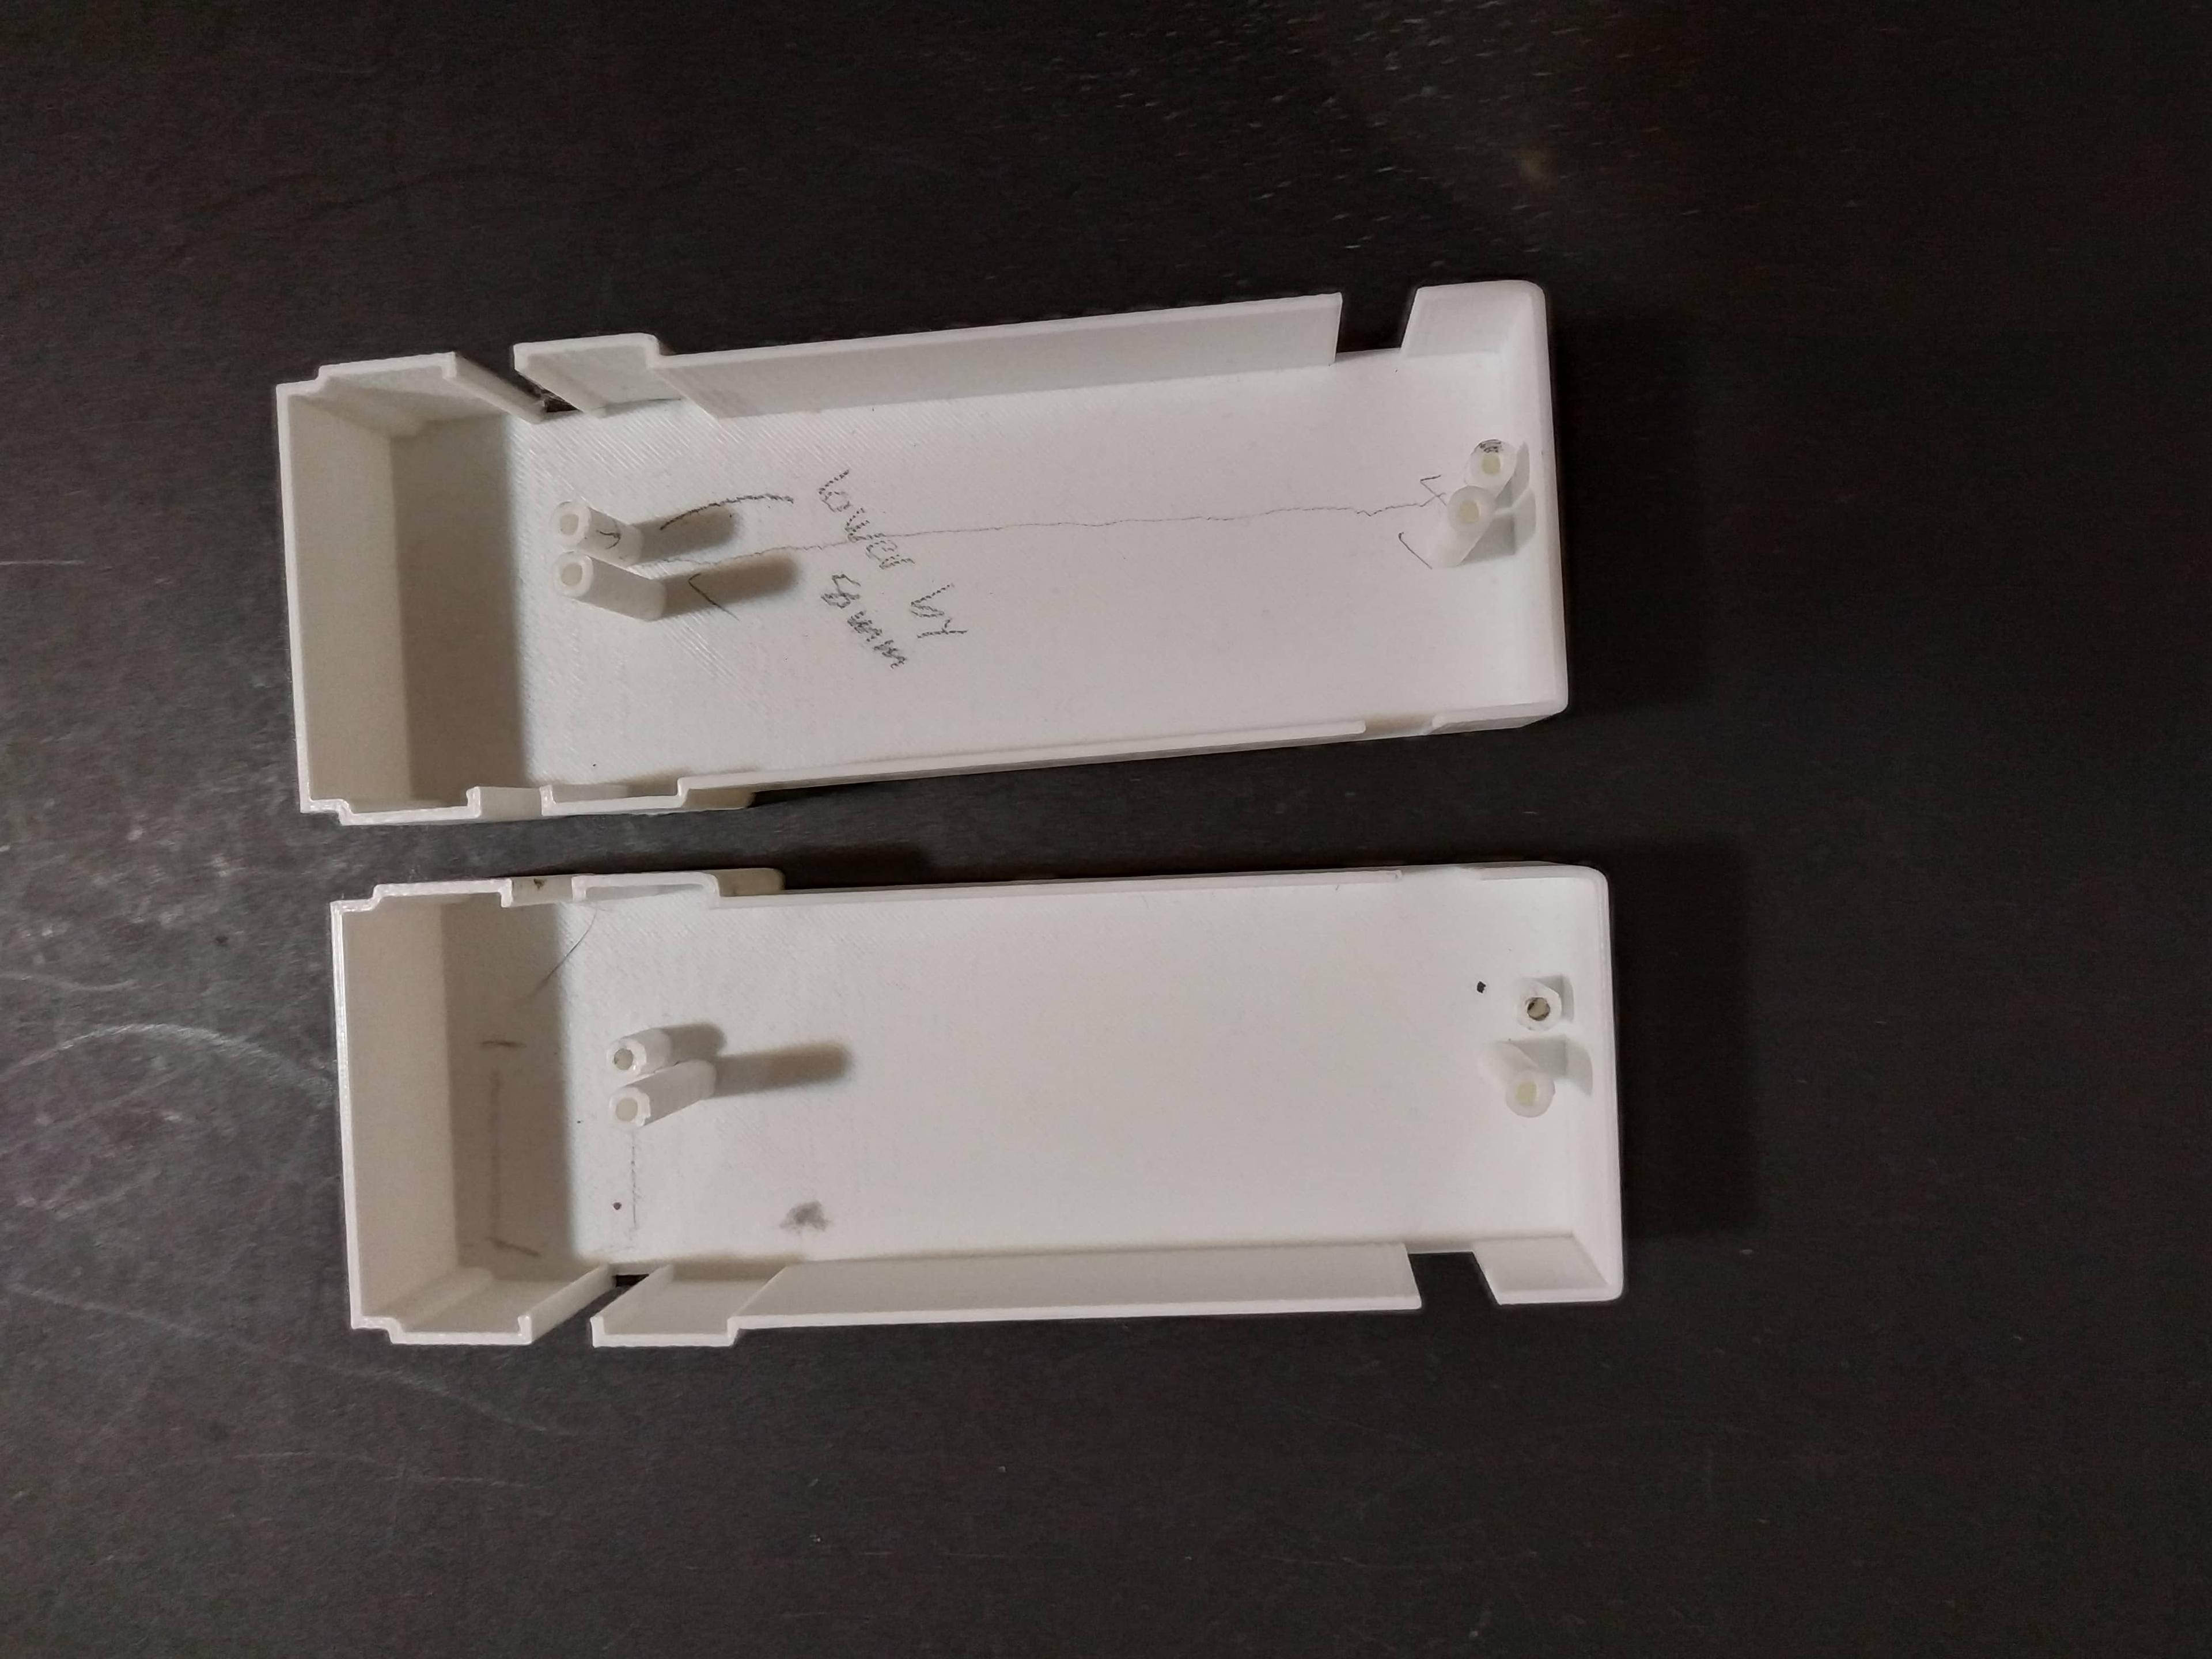 Two white plastic 3D models sit on a table, facing up. They have a 3D outline and extrusions for screw holes coming up from a flat base, and there are some pencil markings on them indicating proposed design changes